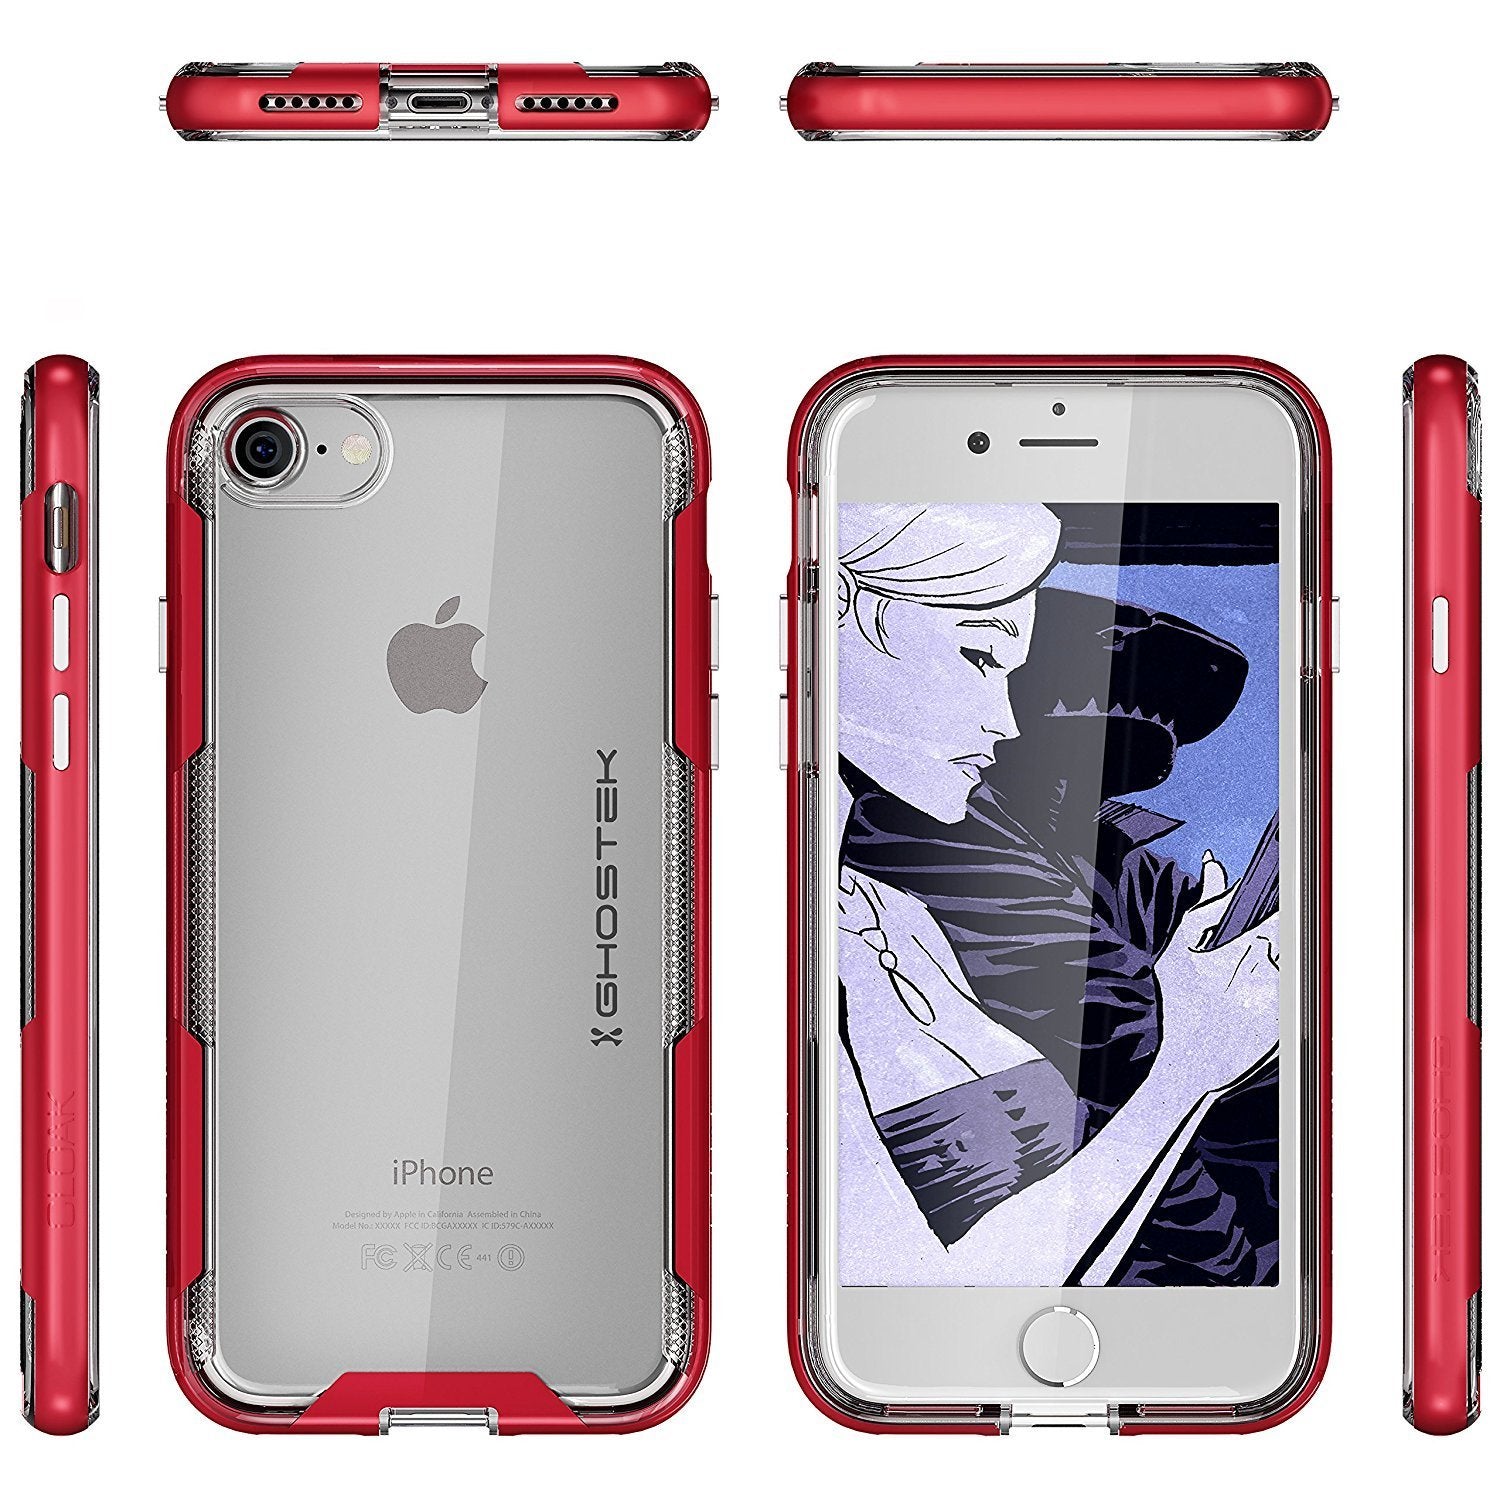 iPhone 8 Case, Ghostek Cloak 3 Series Case for iPhone 8 Case Clear Protective Case [RED] - PunkCase NZ